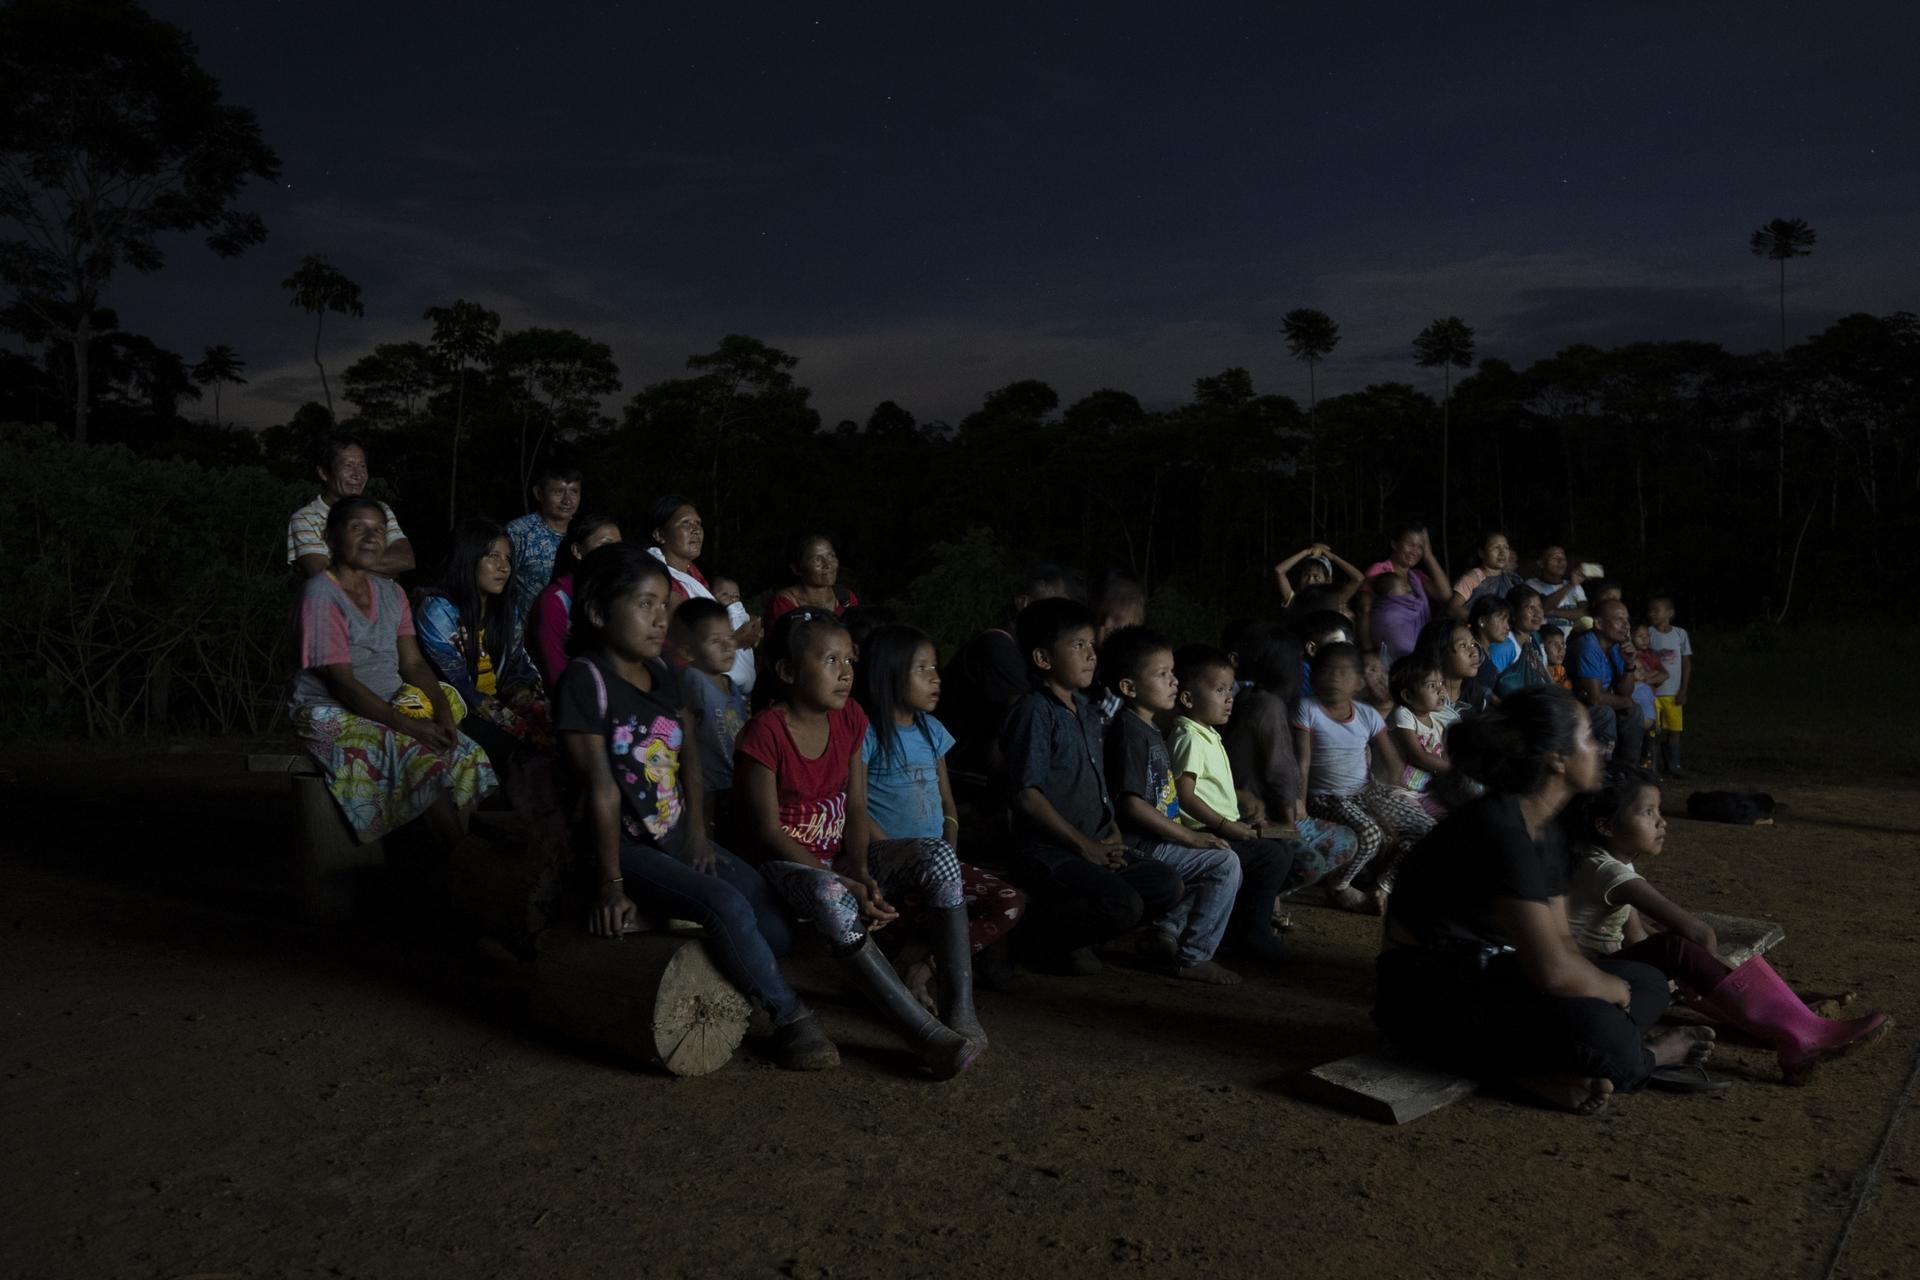 Crowds of people from Indigenous communities gather to watch films during the Kanua film festival in Ecuador.